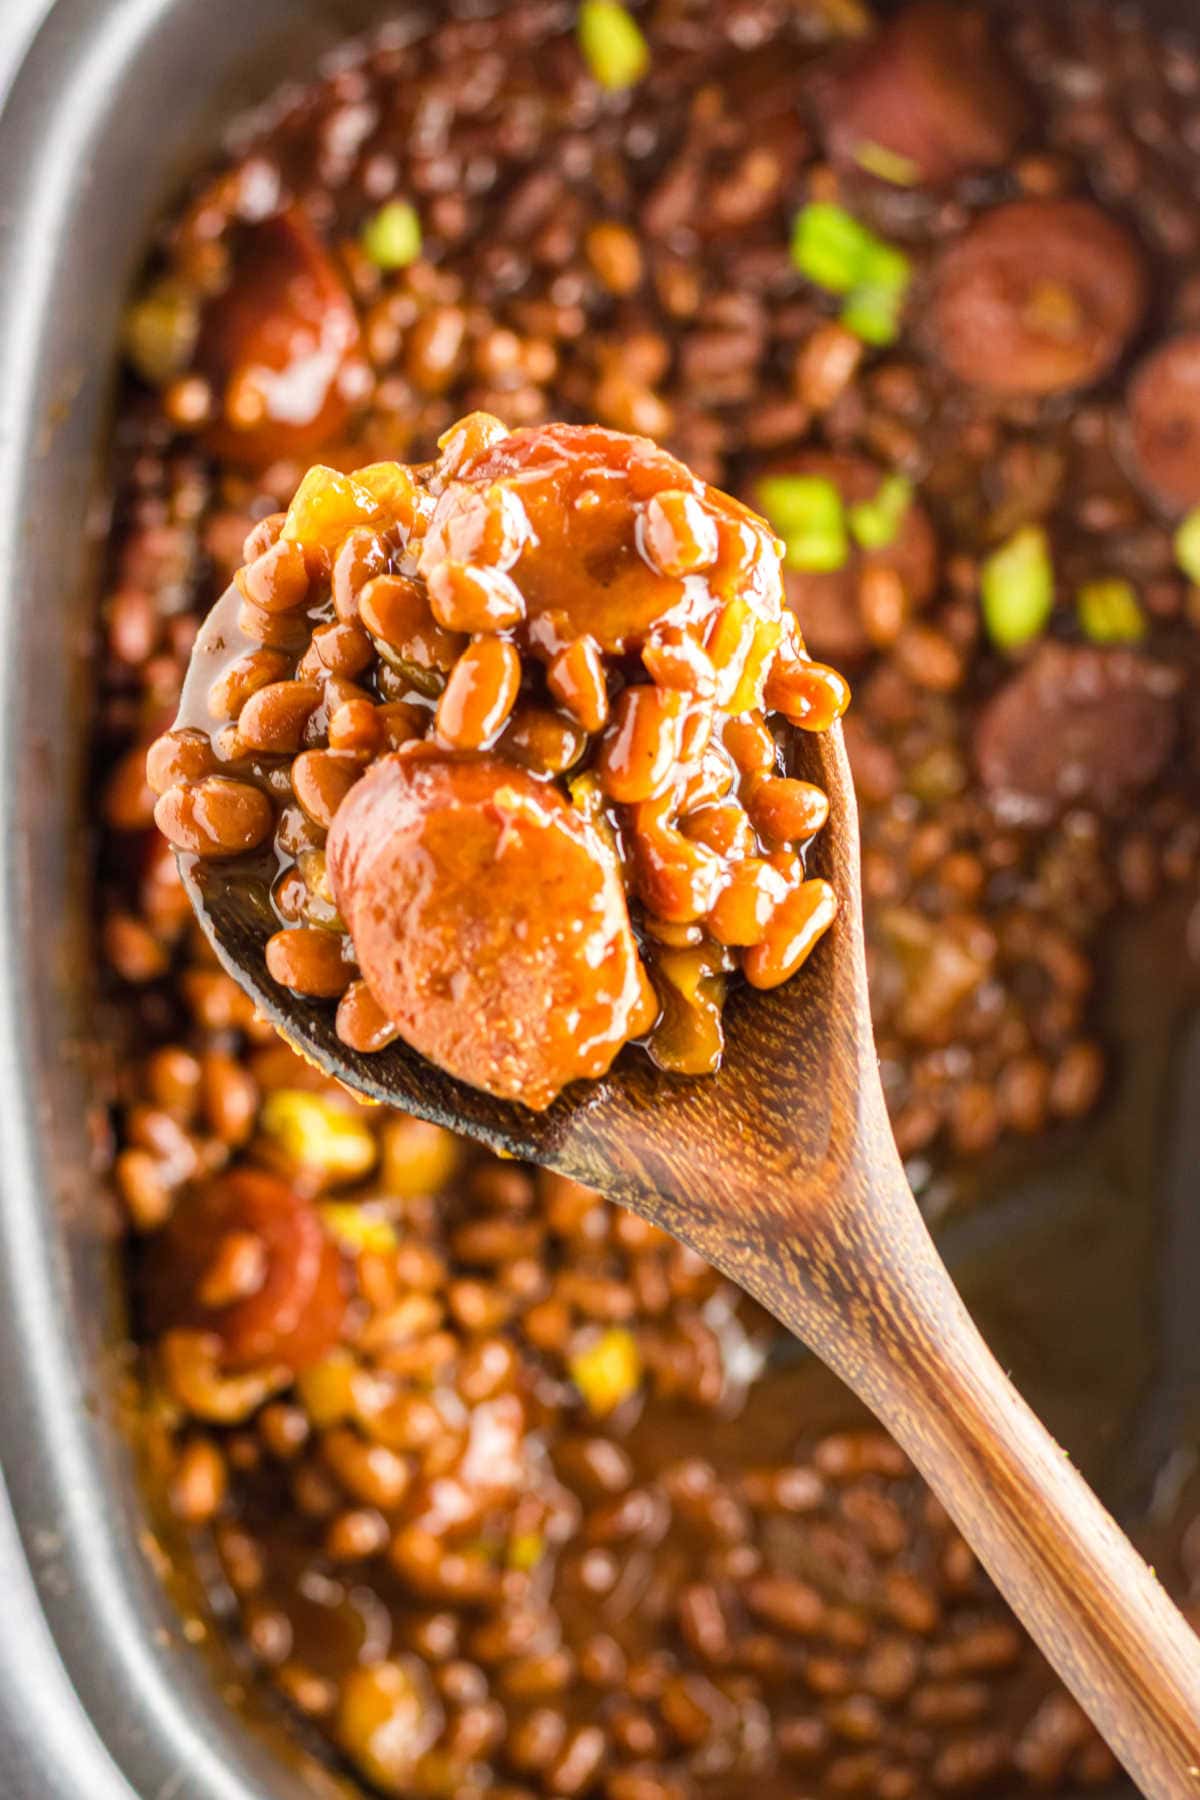 A serving spoon with filled with baked beans and kielbasa sausage.